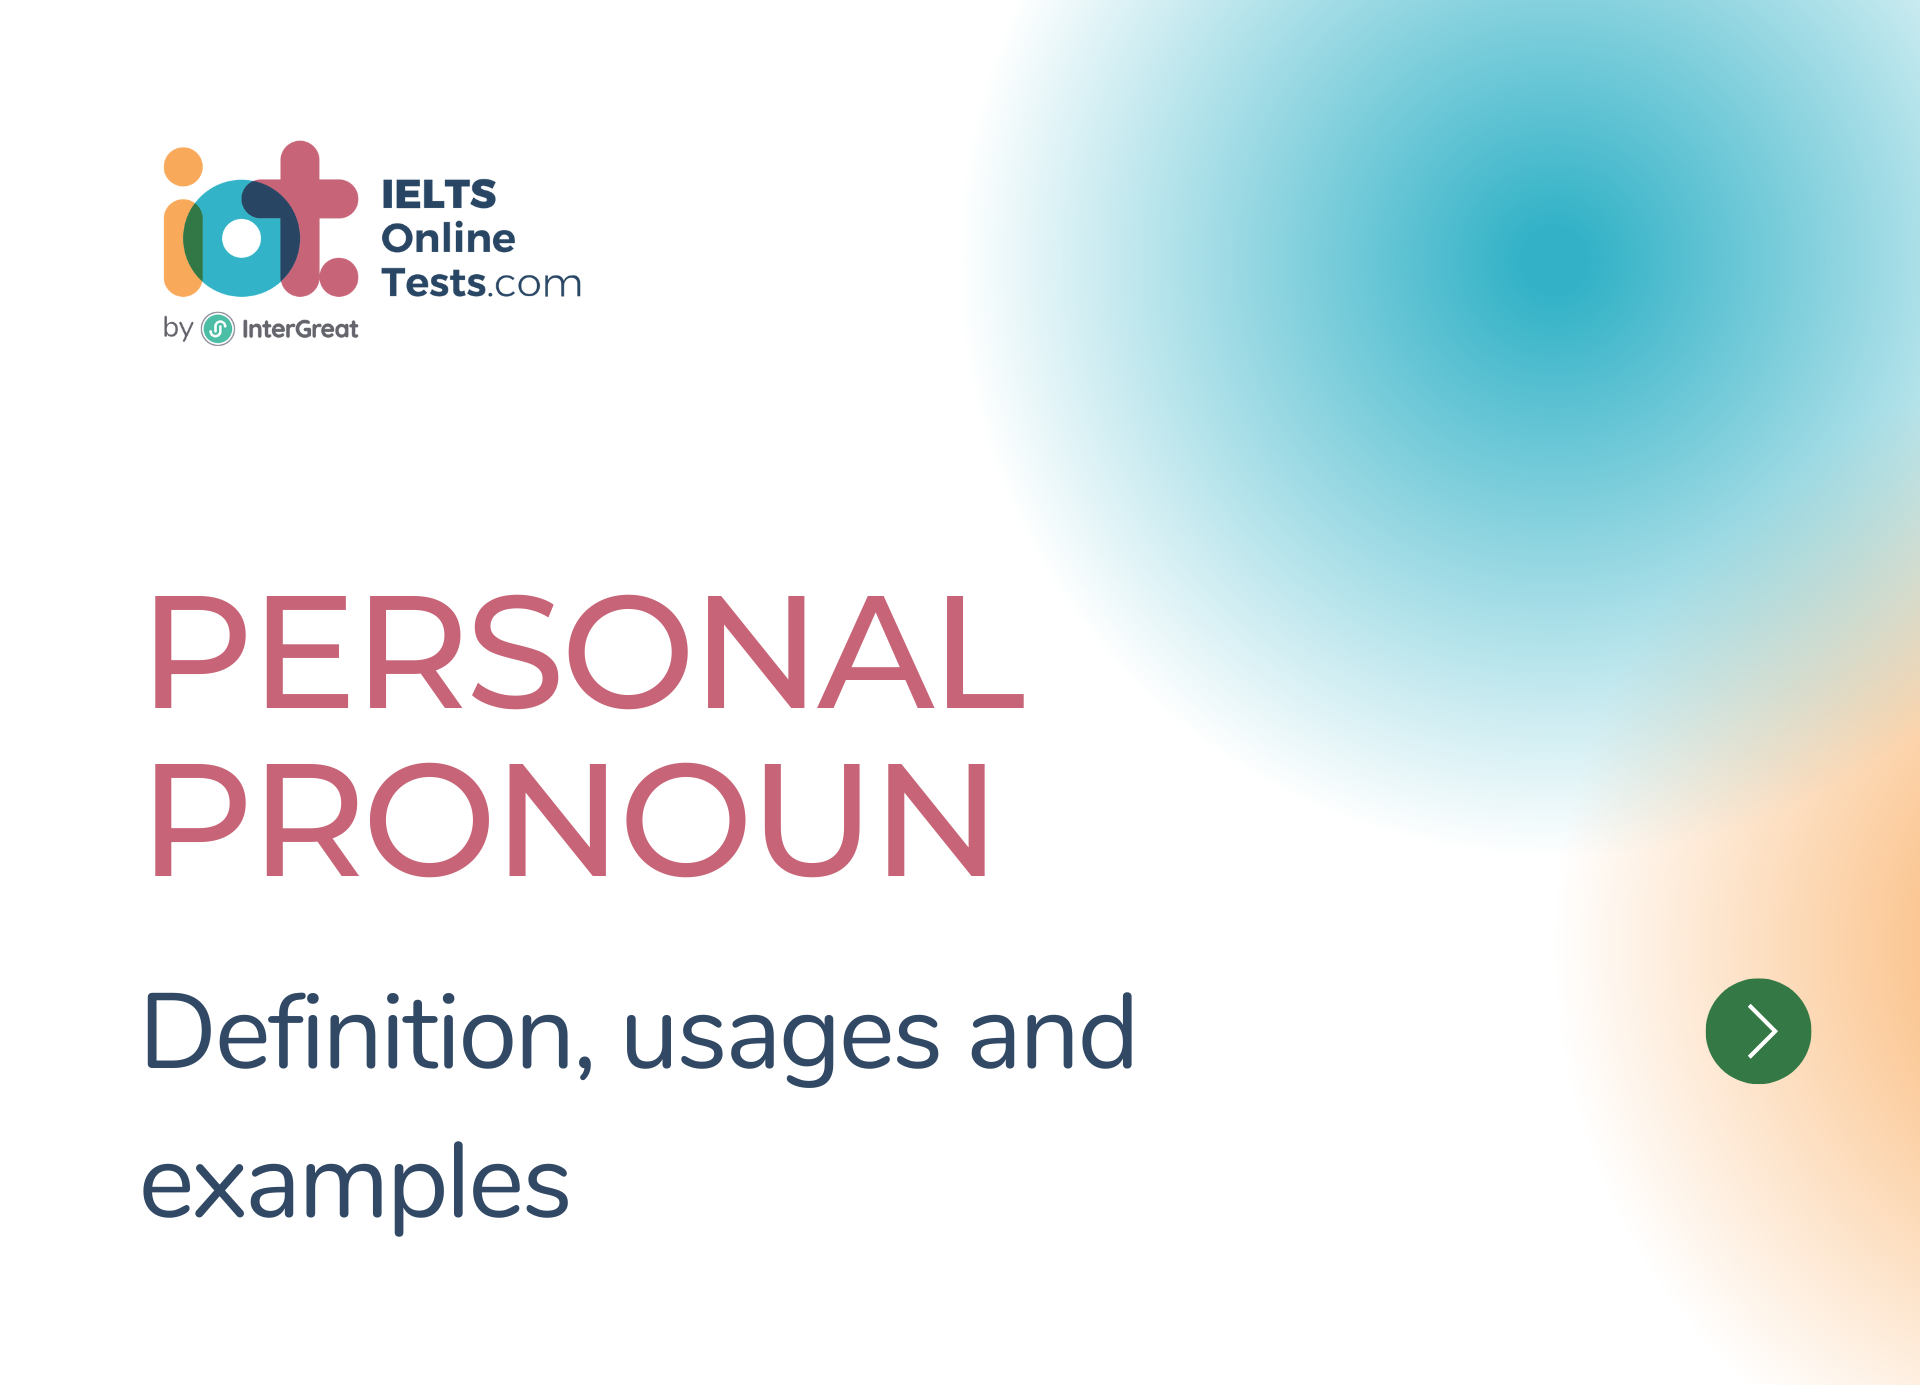 Personal pronoun definition and examples